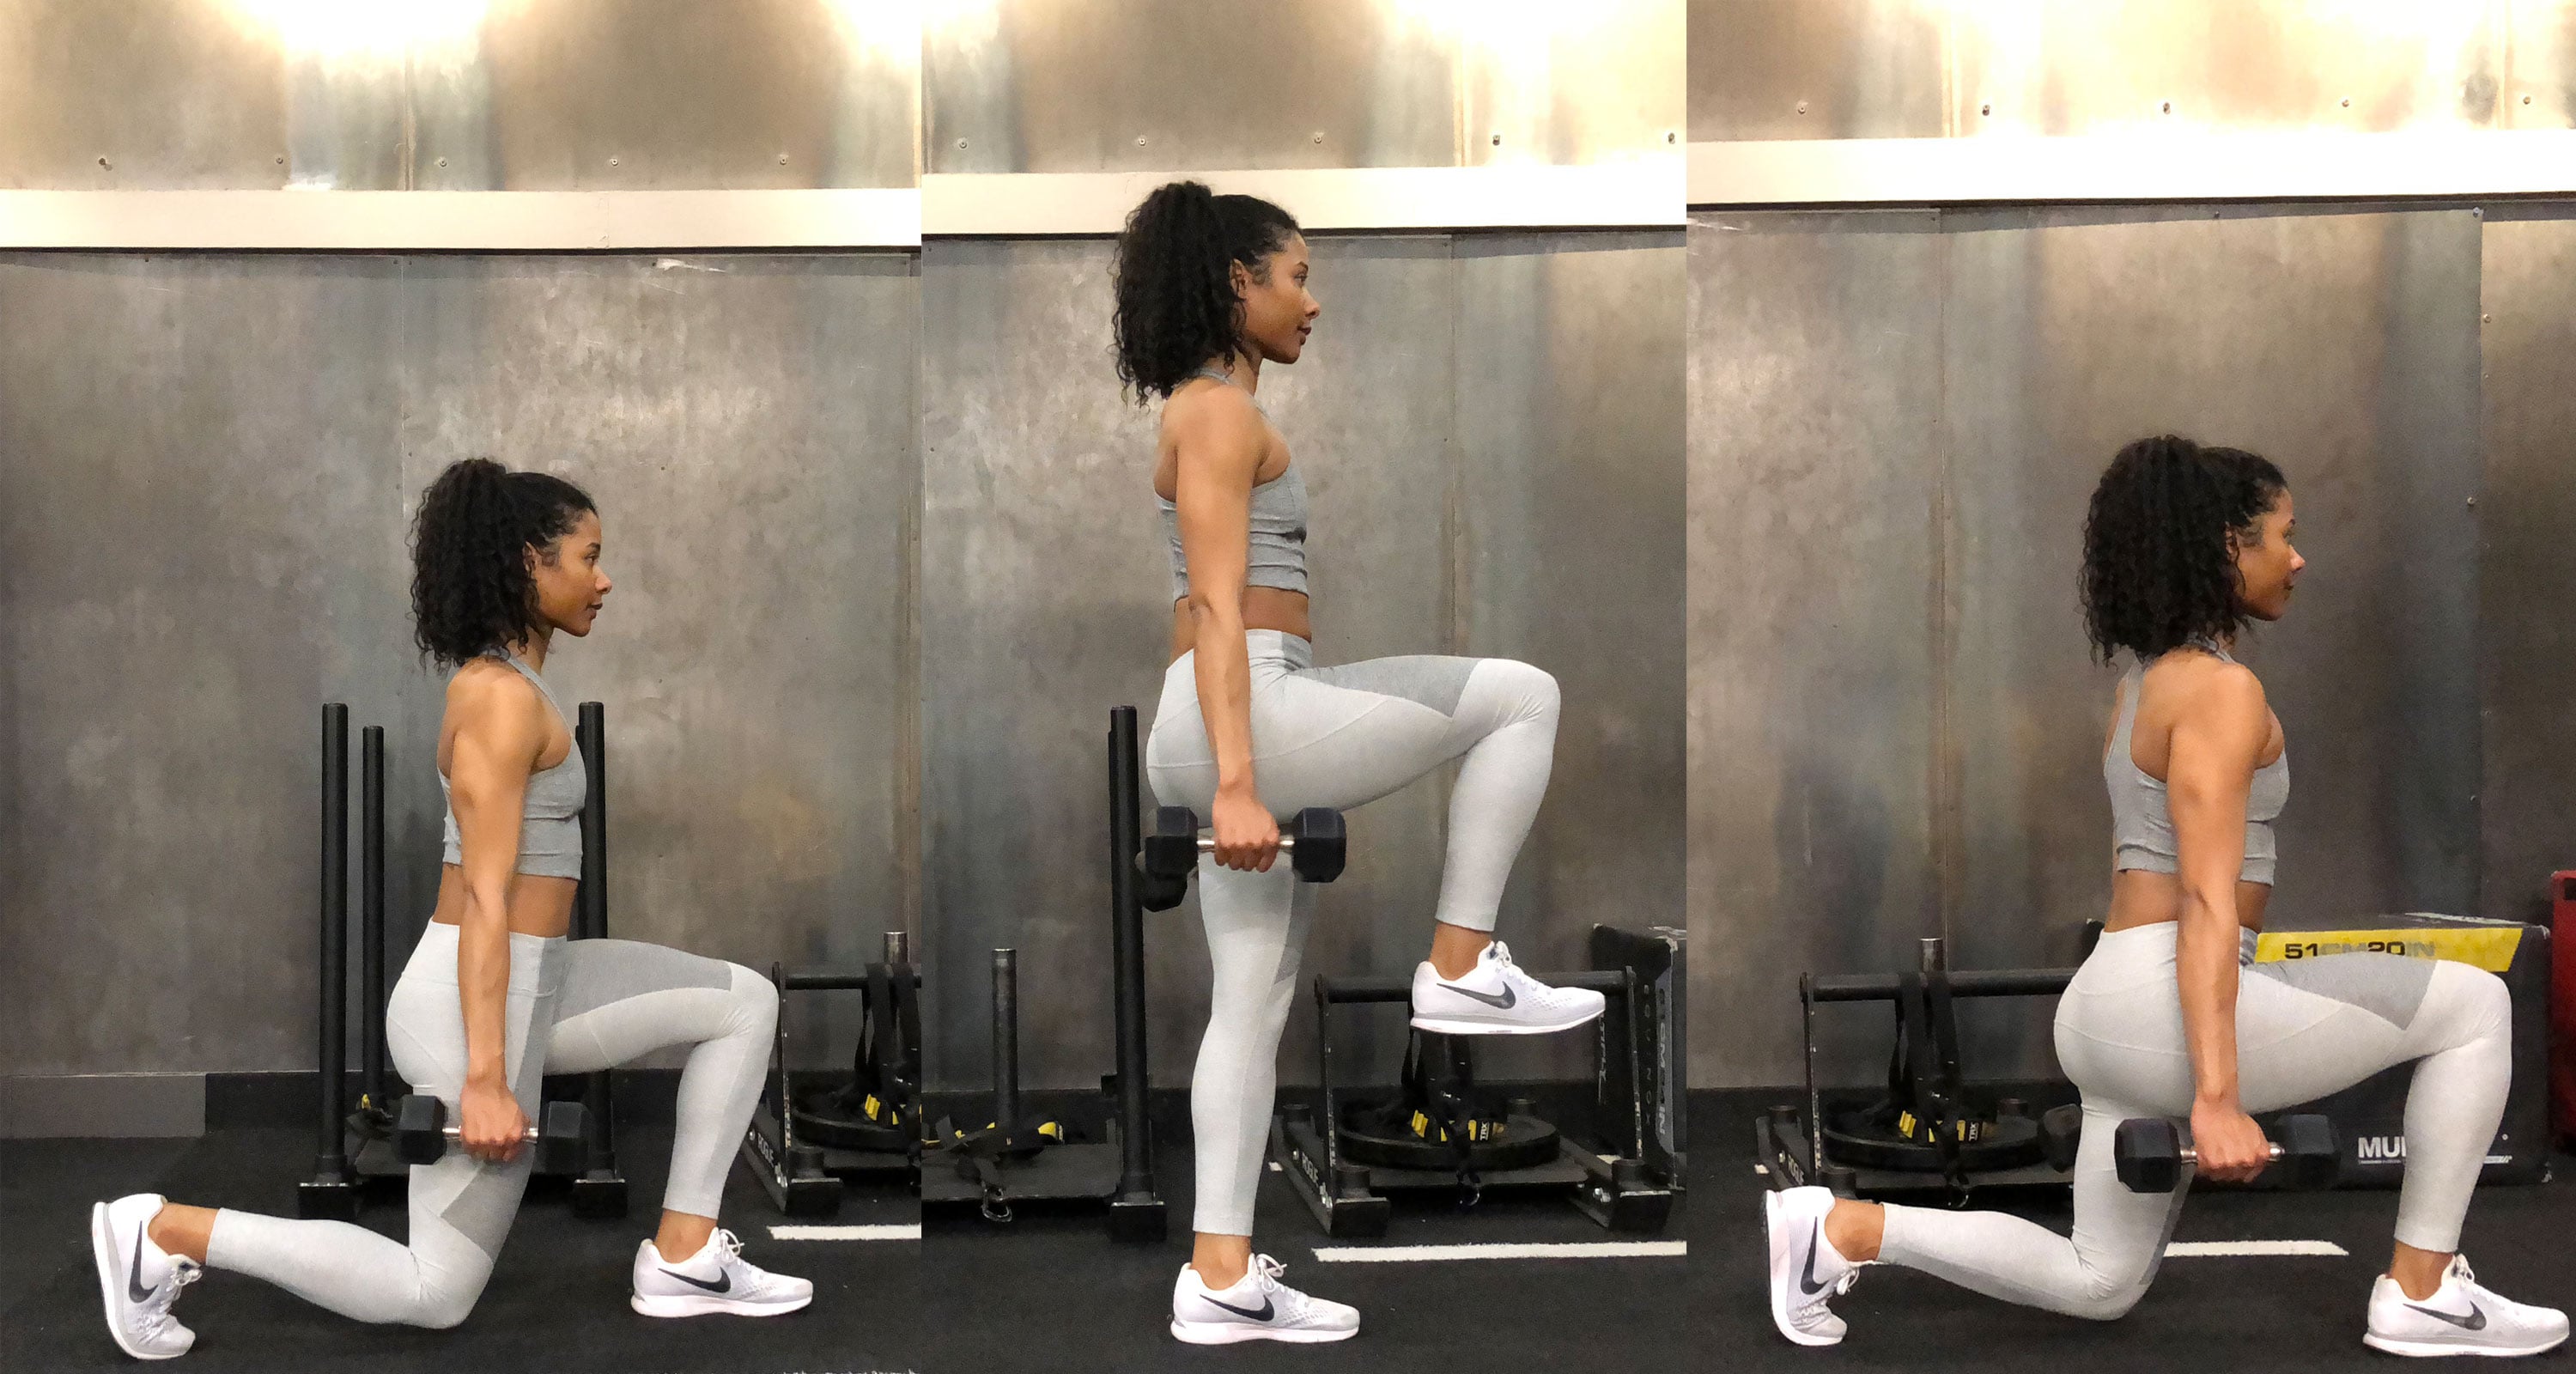 Here's How To Rock a Full body Workout With Just A Push-Up - GymGuider.com